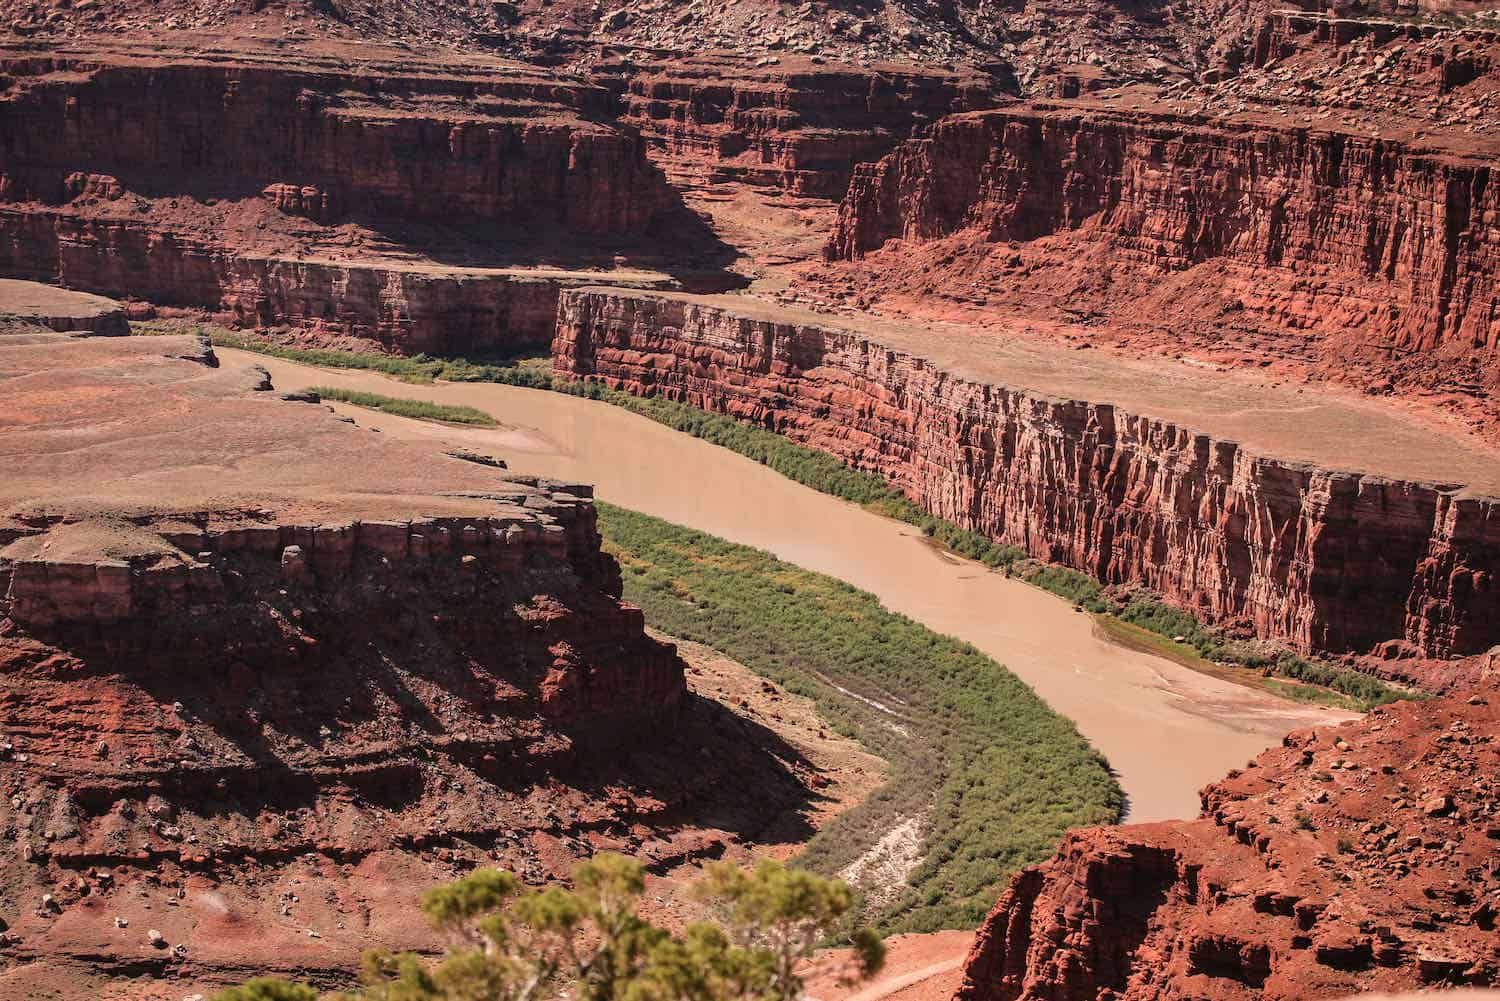 Section of muddy river winding through red cliffs at Dead Horse Point State Park.